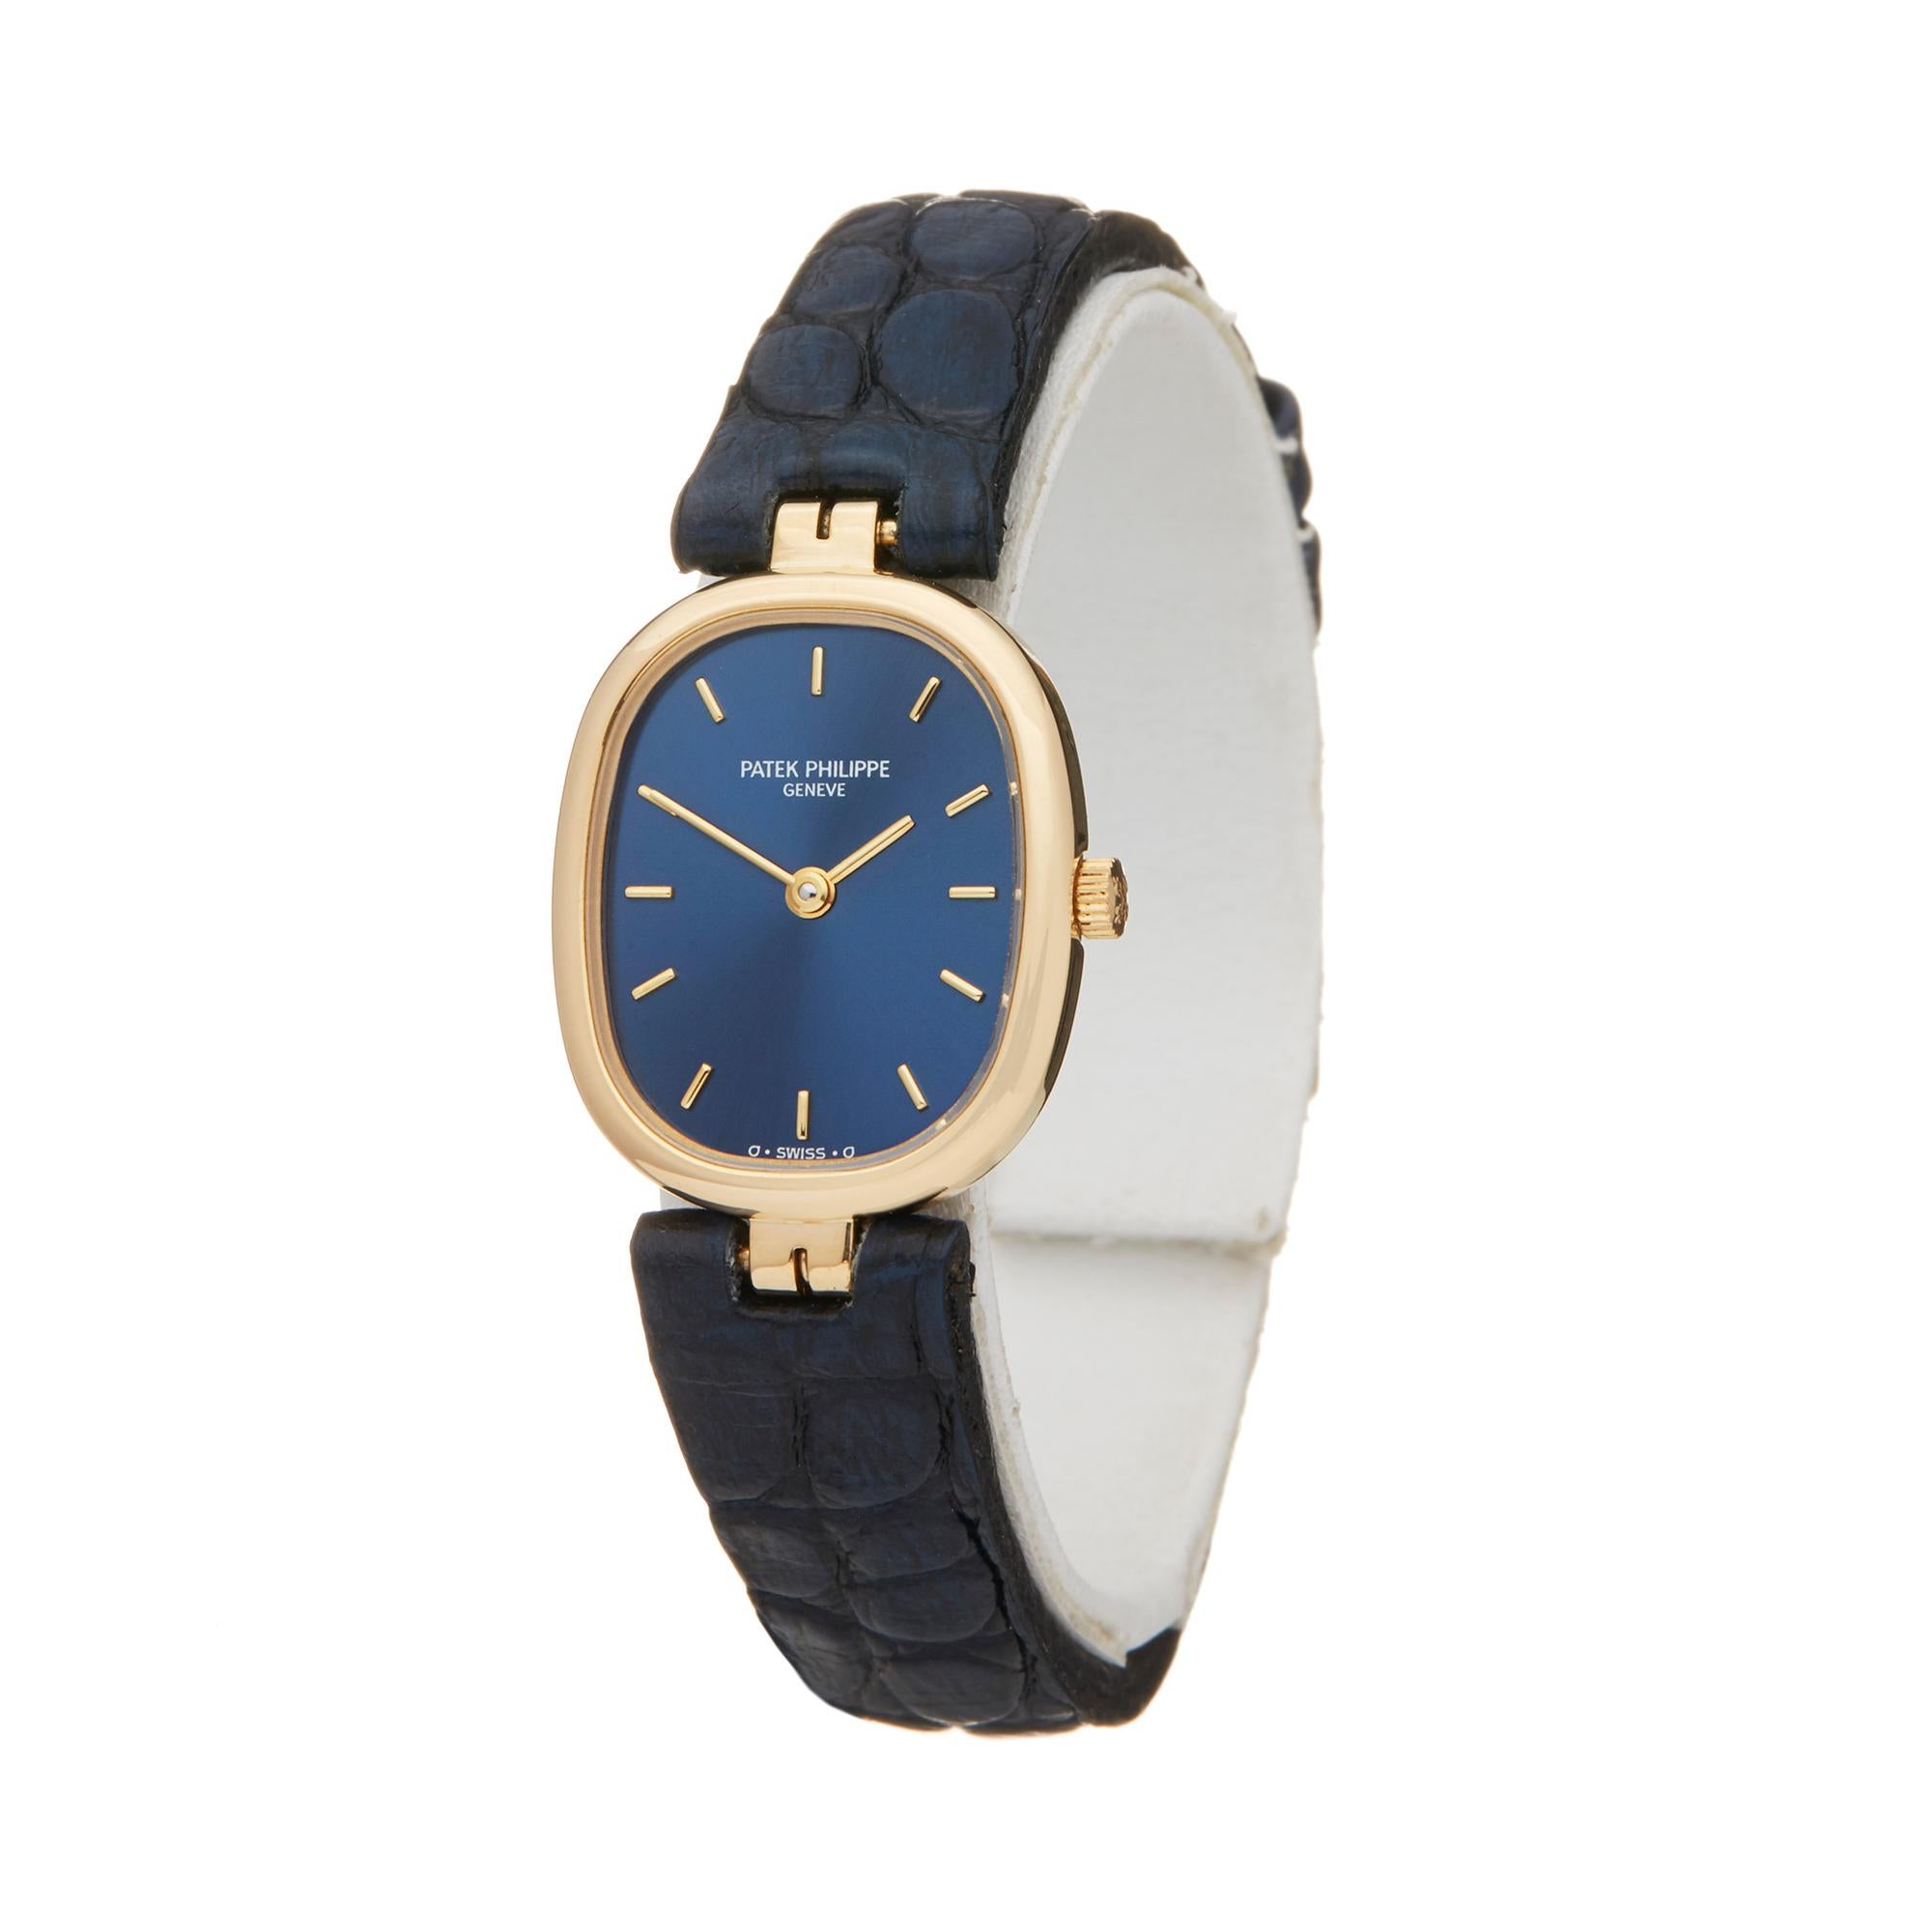 Ref: W5757
Manufacturer: Patek Philippe
Model: Ellipse
Model Ref: 4764
Age: Circa 1990's
Gender: Ladies
Complete With: Service Pouch Only
Dial: Blue Baton
Glass: Sapphire Crystal
Movement: Quartz
Water Resistance: To Manufacturers